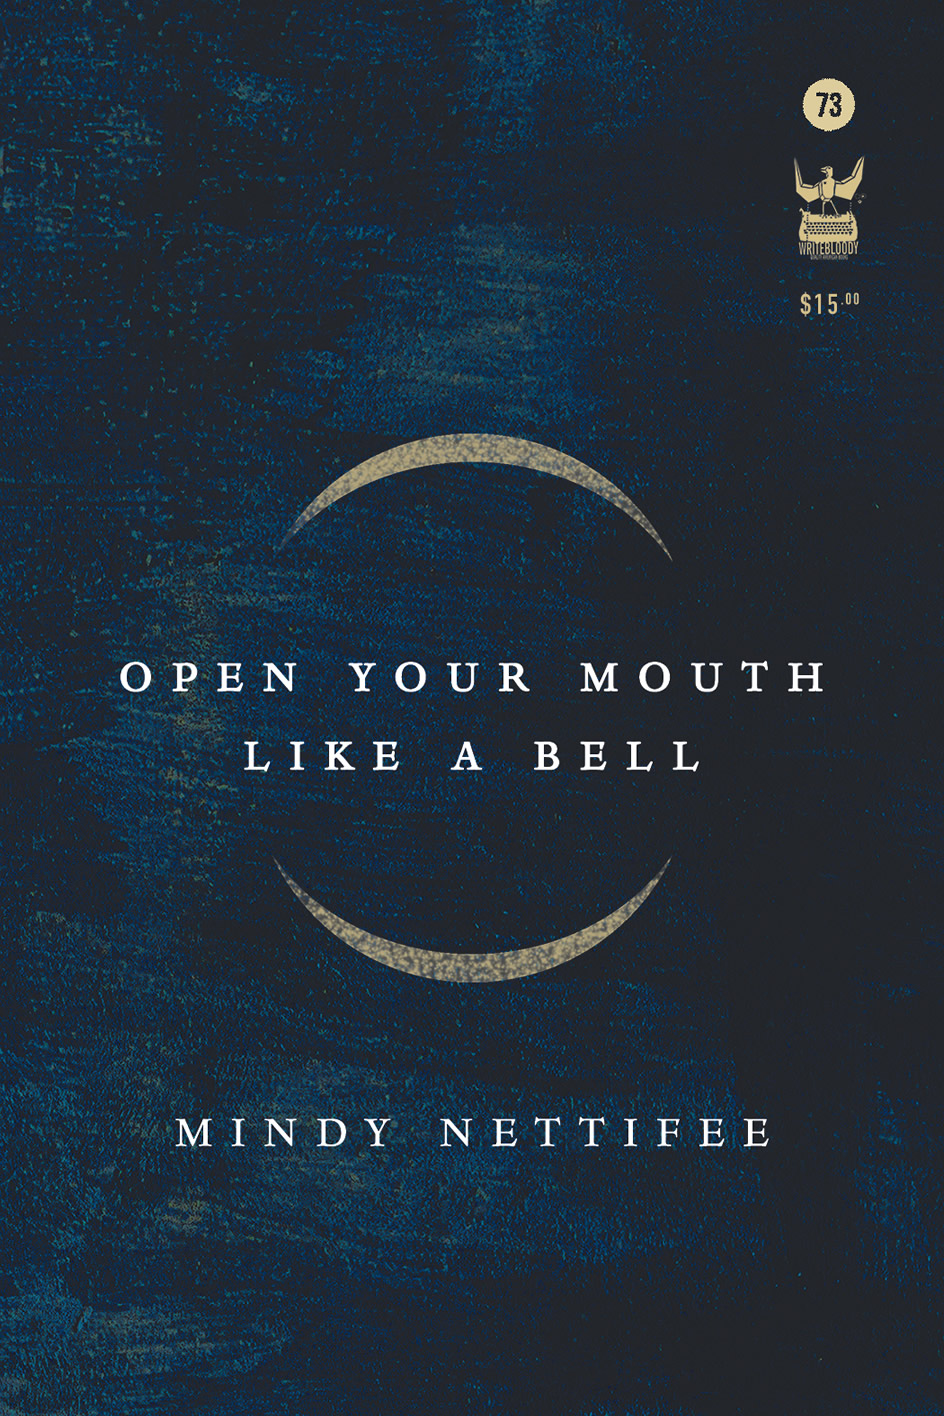 A dynamic midnight blue background flecked with the suggestion of light, and in the center two gold crescent moons face eachother like an open mouth, with the title of the book between them.